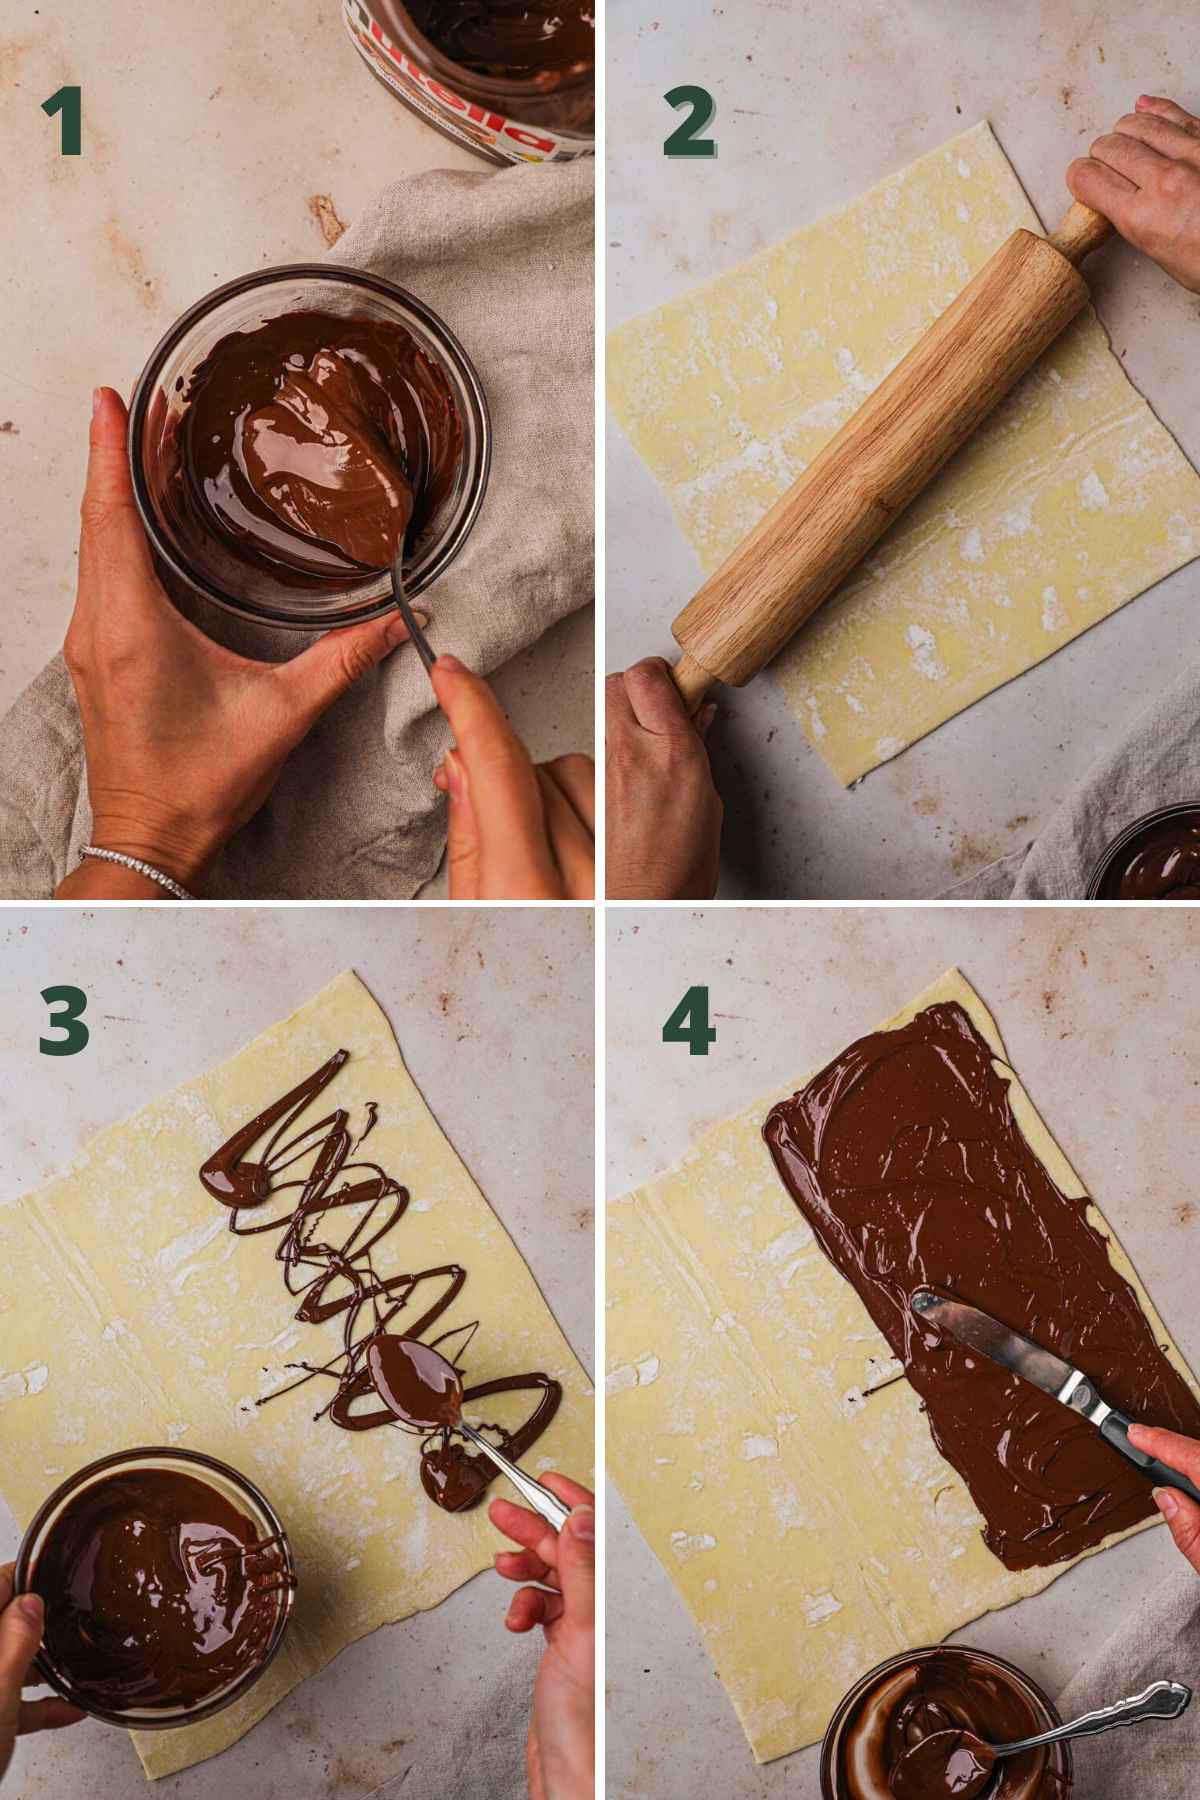 Steps to make chocolate twists, mix melted chocolate and nutella, roll out puff pastry, spread chocolate on half of the puff pastry sheet.